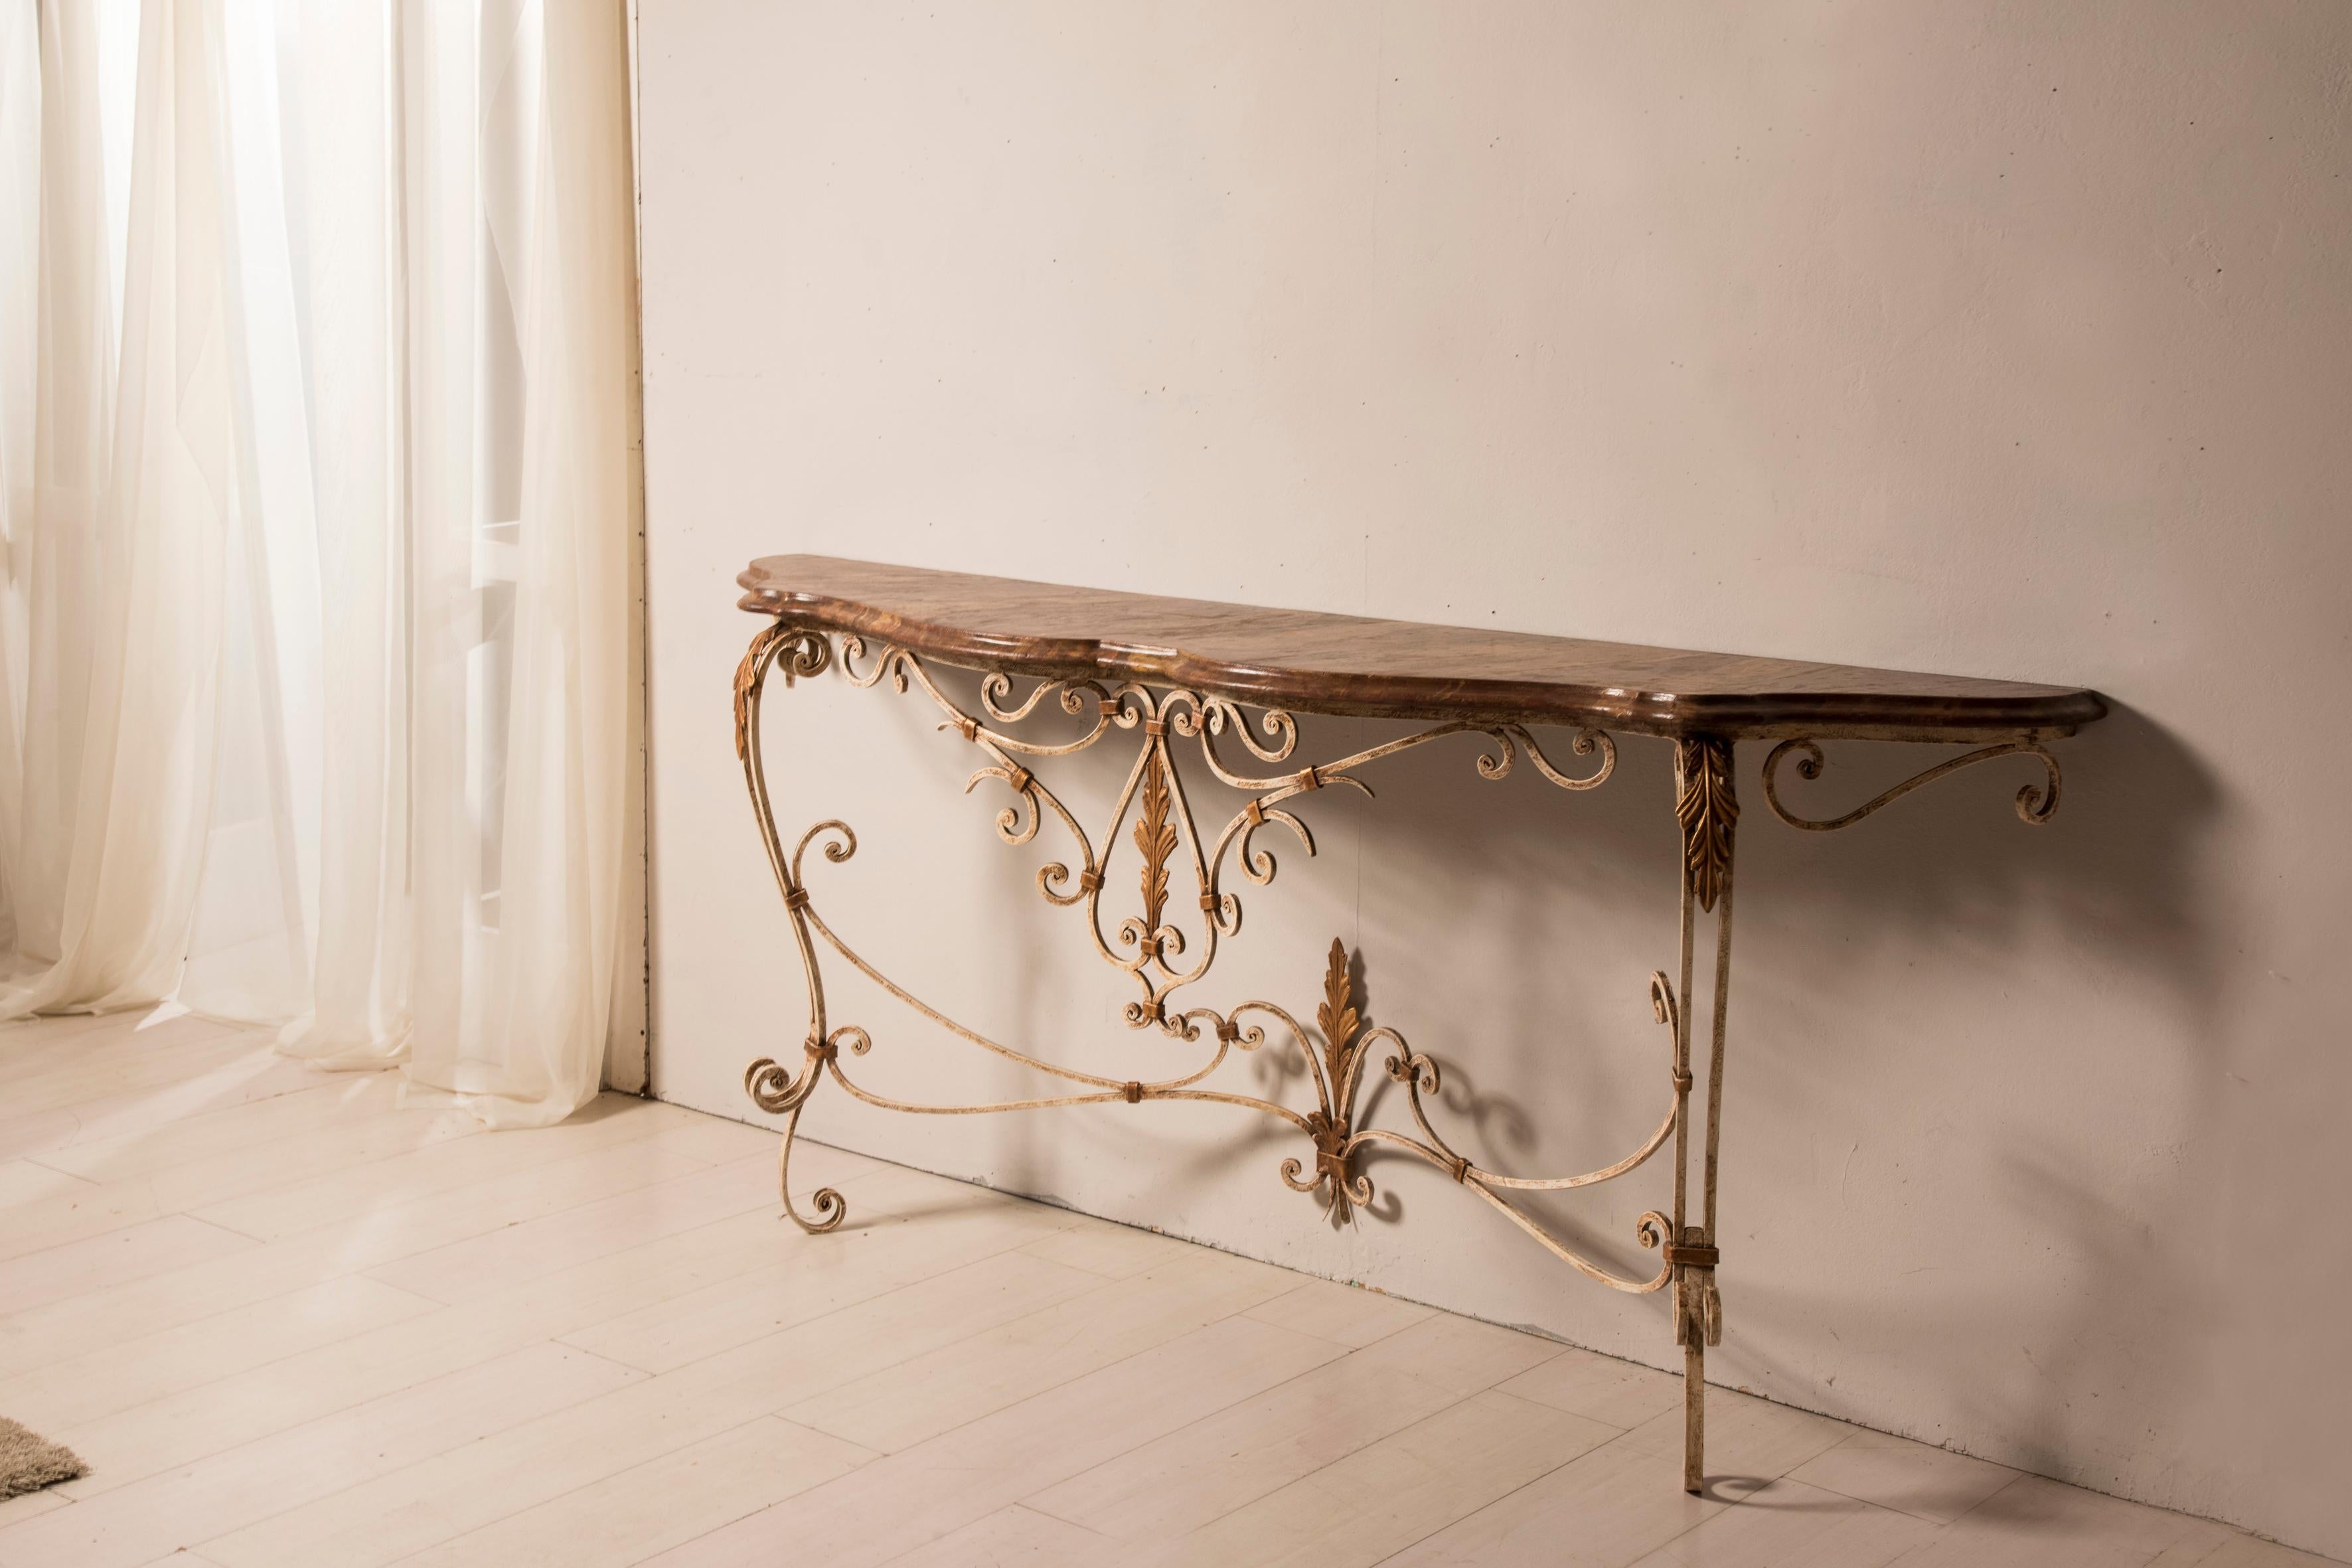 20th Century Lacquered Wrought Iron and Marbled Wood Top Console Table 
This Item comes from Italy from 1950s period.
It has a shabby effect given by passed time on the lacquer. 
The wooden top has been restored in conservative way with wax